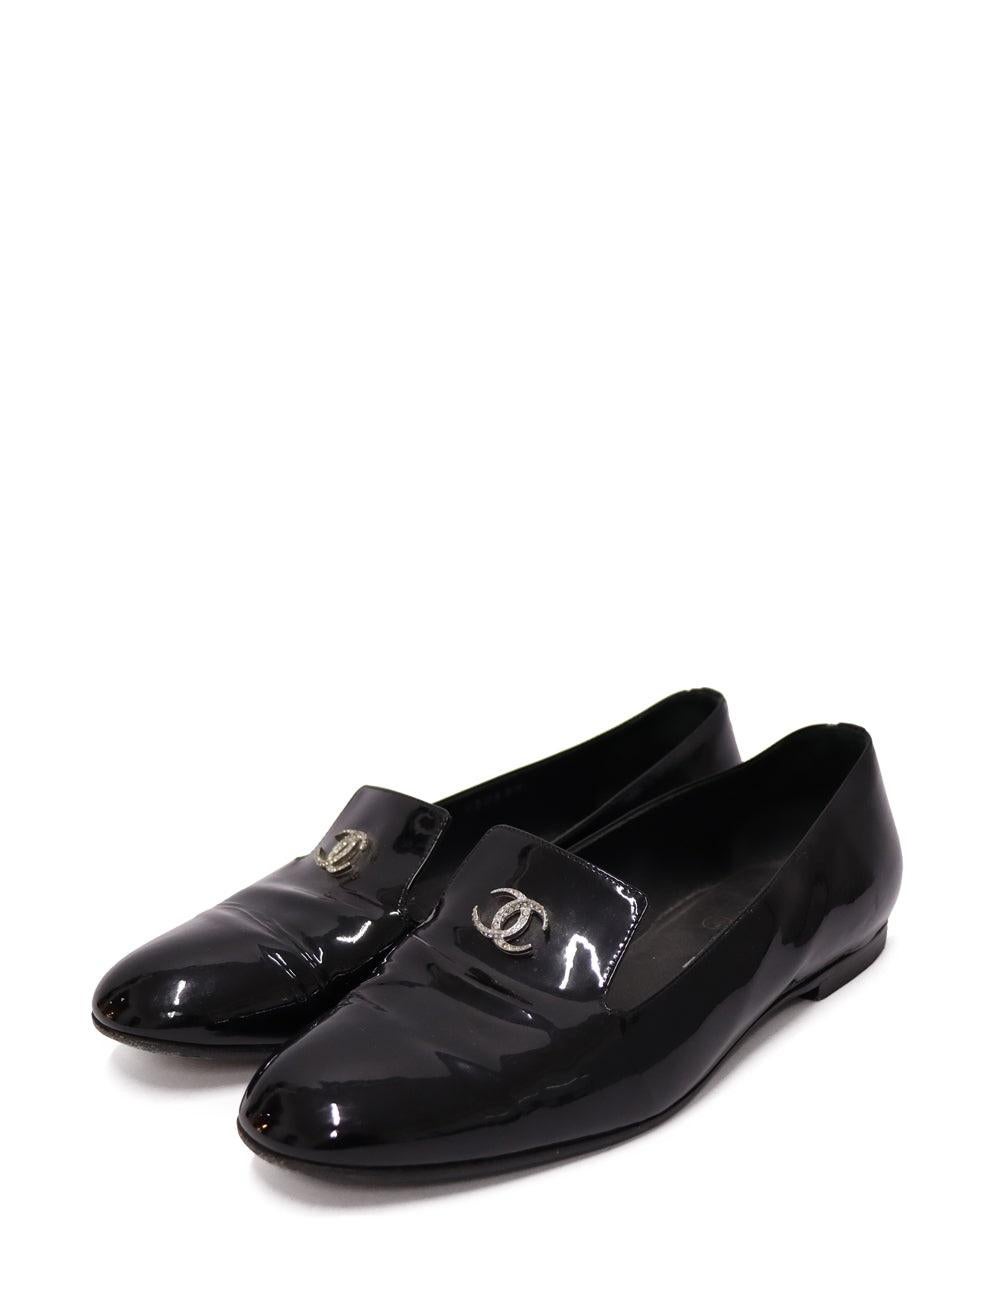 Chanel EU 37 Black Patent Leather Loafers In Good Condition For Sale In Amman, JO